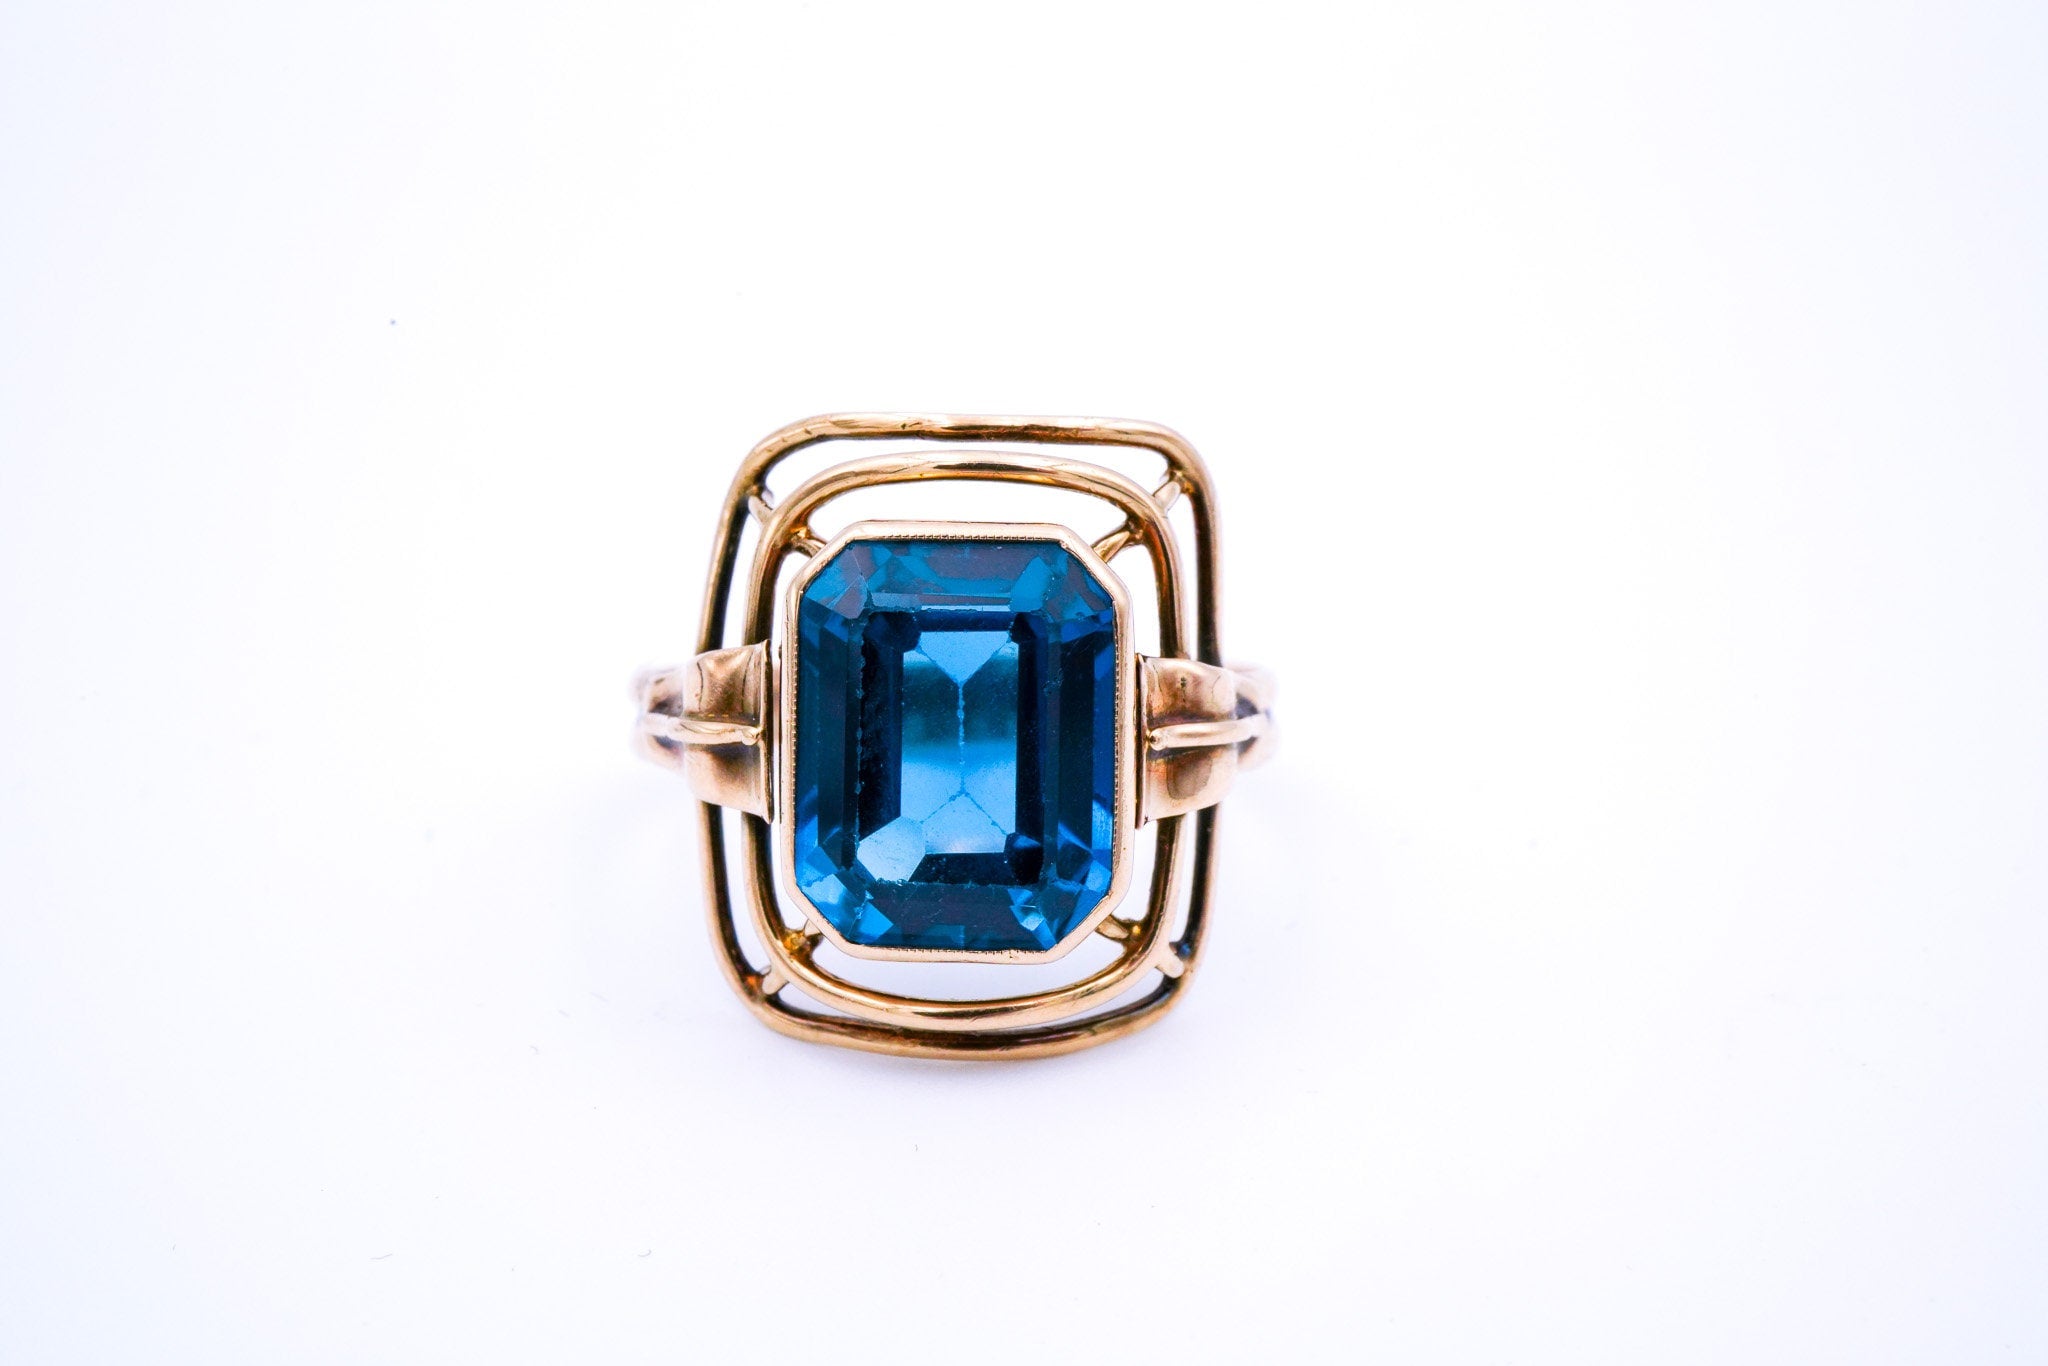 8K Yellow Gold & Spinel Ring - Size 9